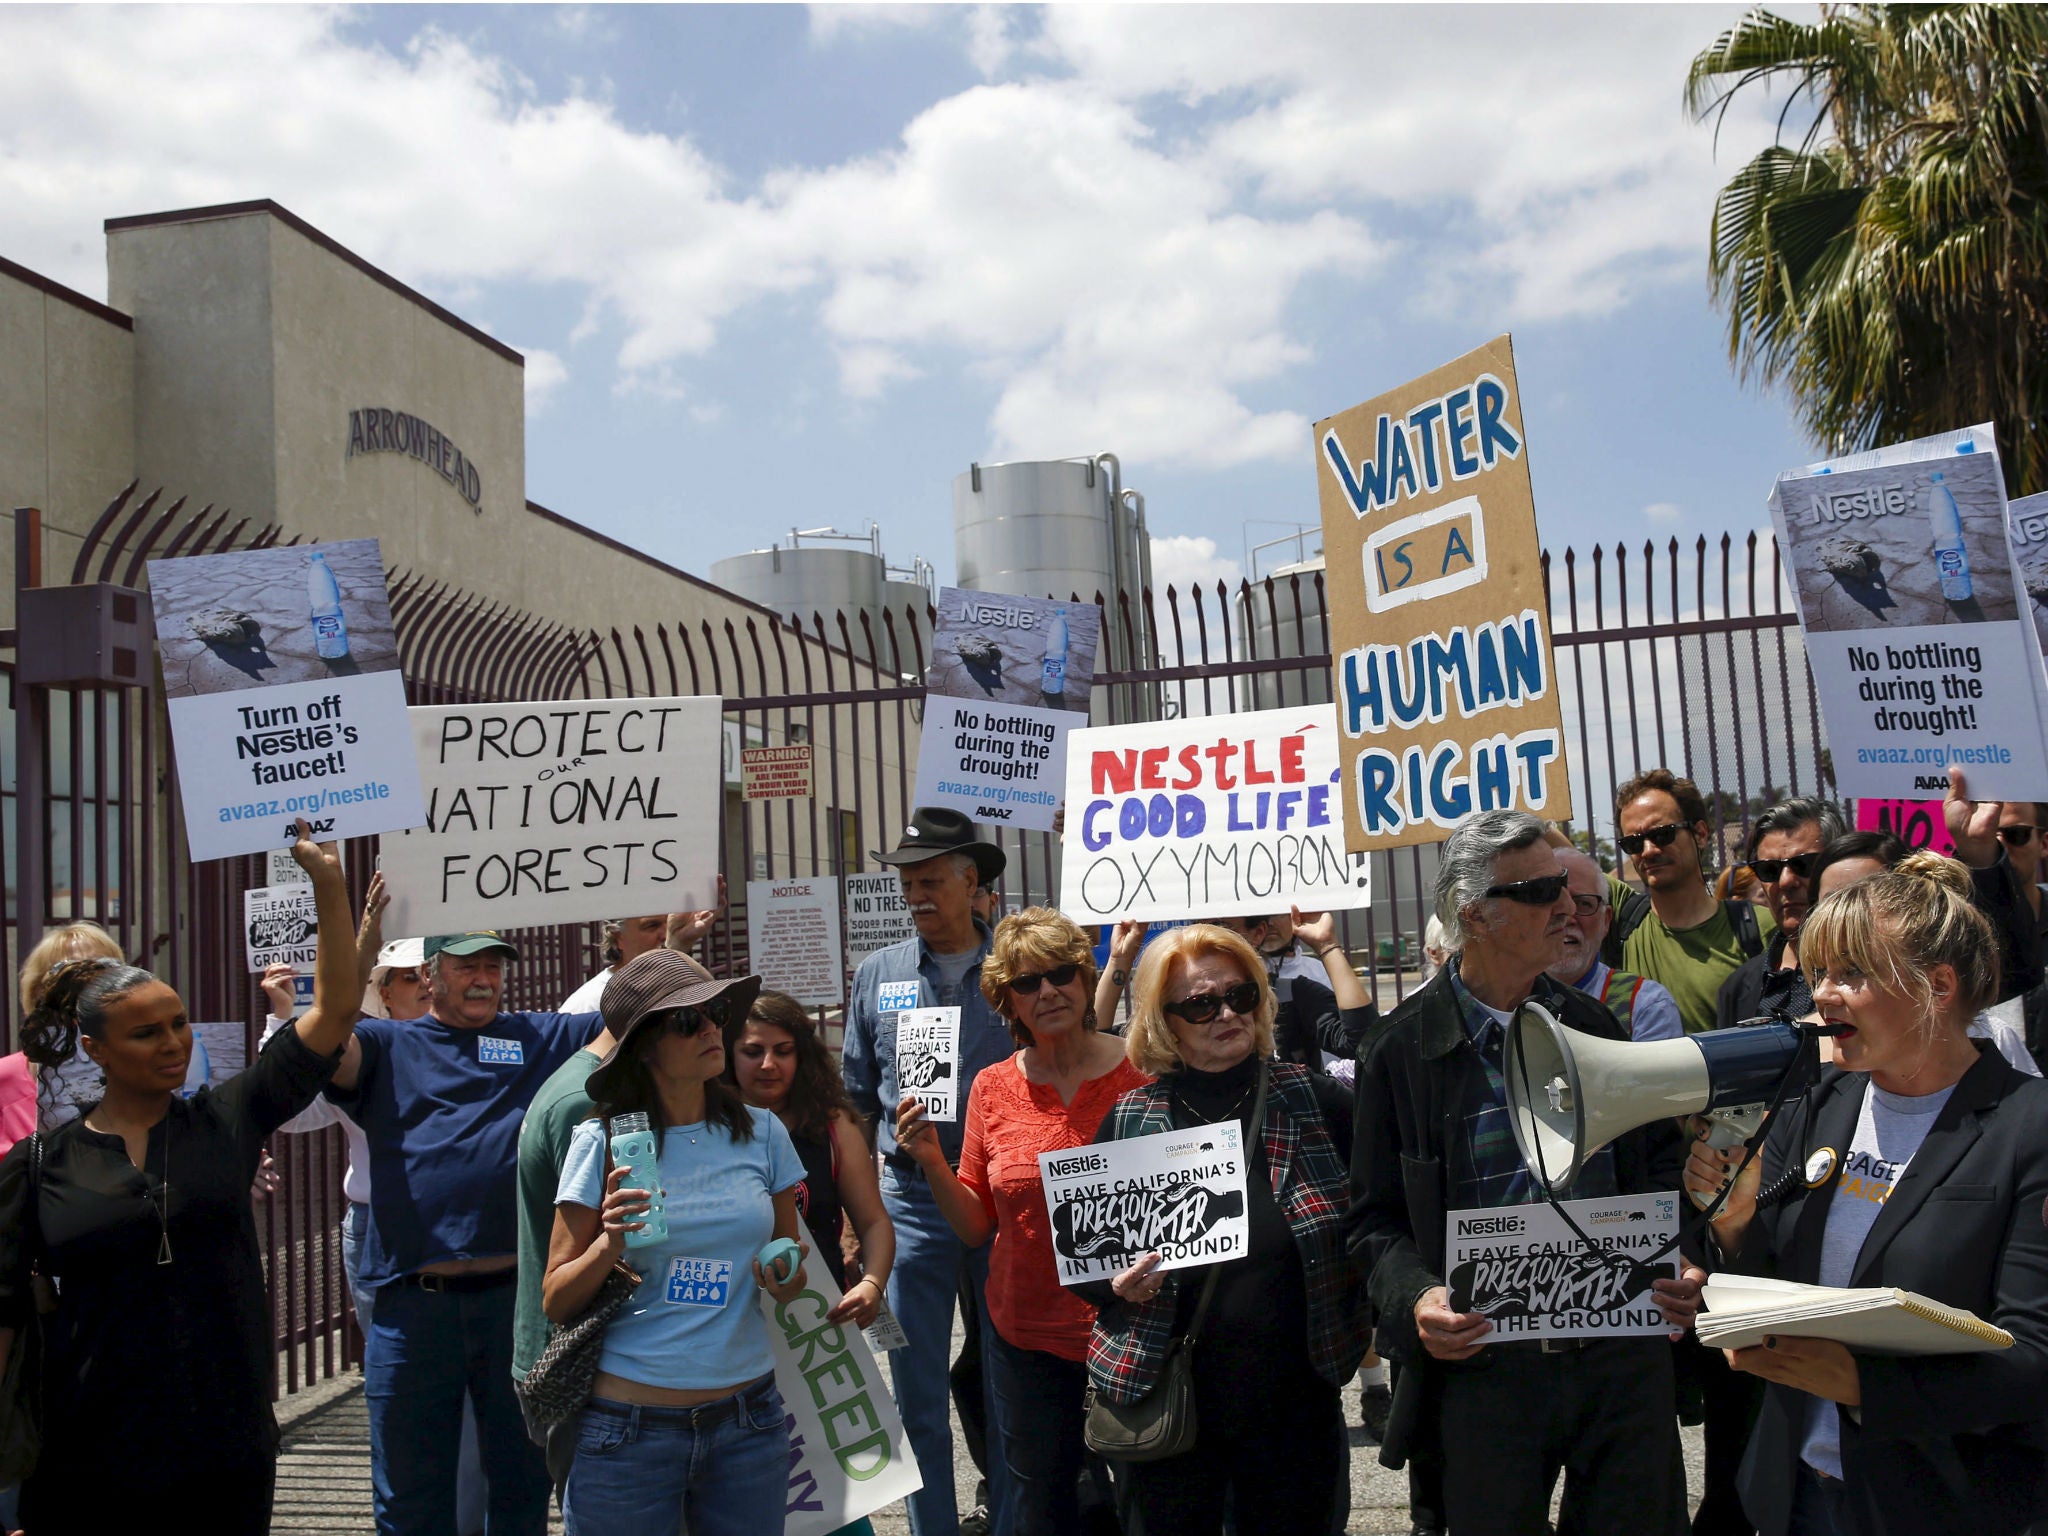 Demonstrators protest against Nestle bottling water during the California drought, outside a Nestle Arrowhead water bottling plant in Los Angeles